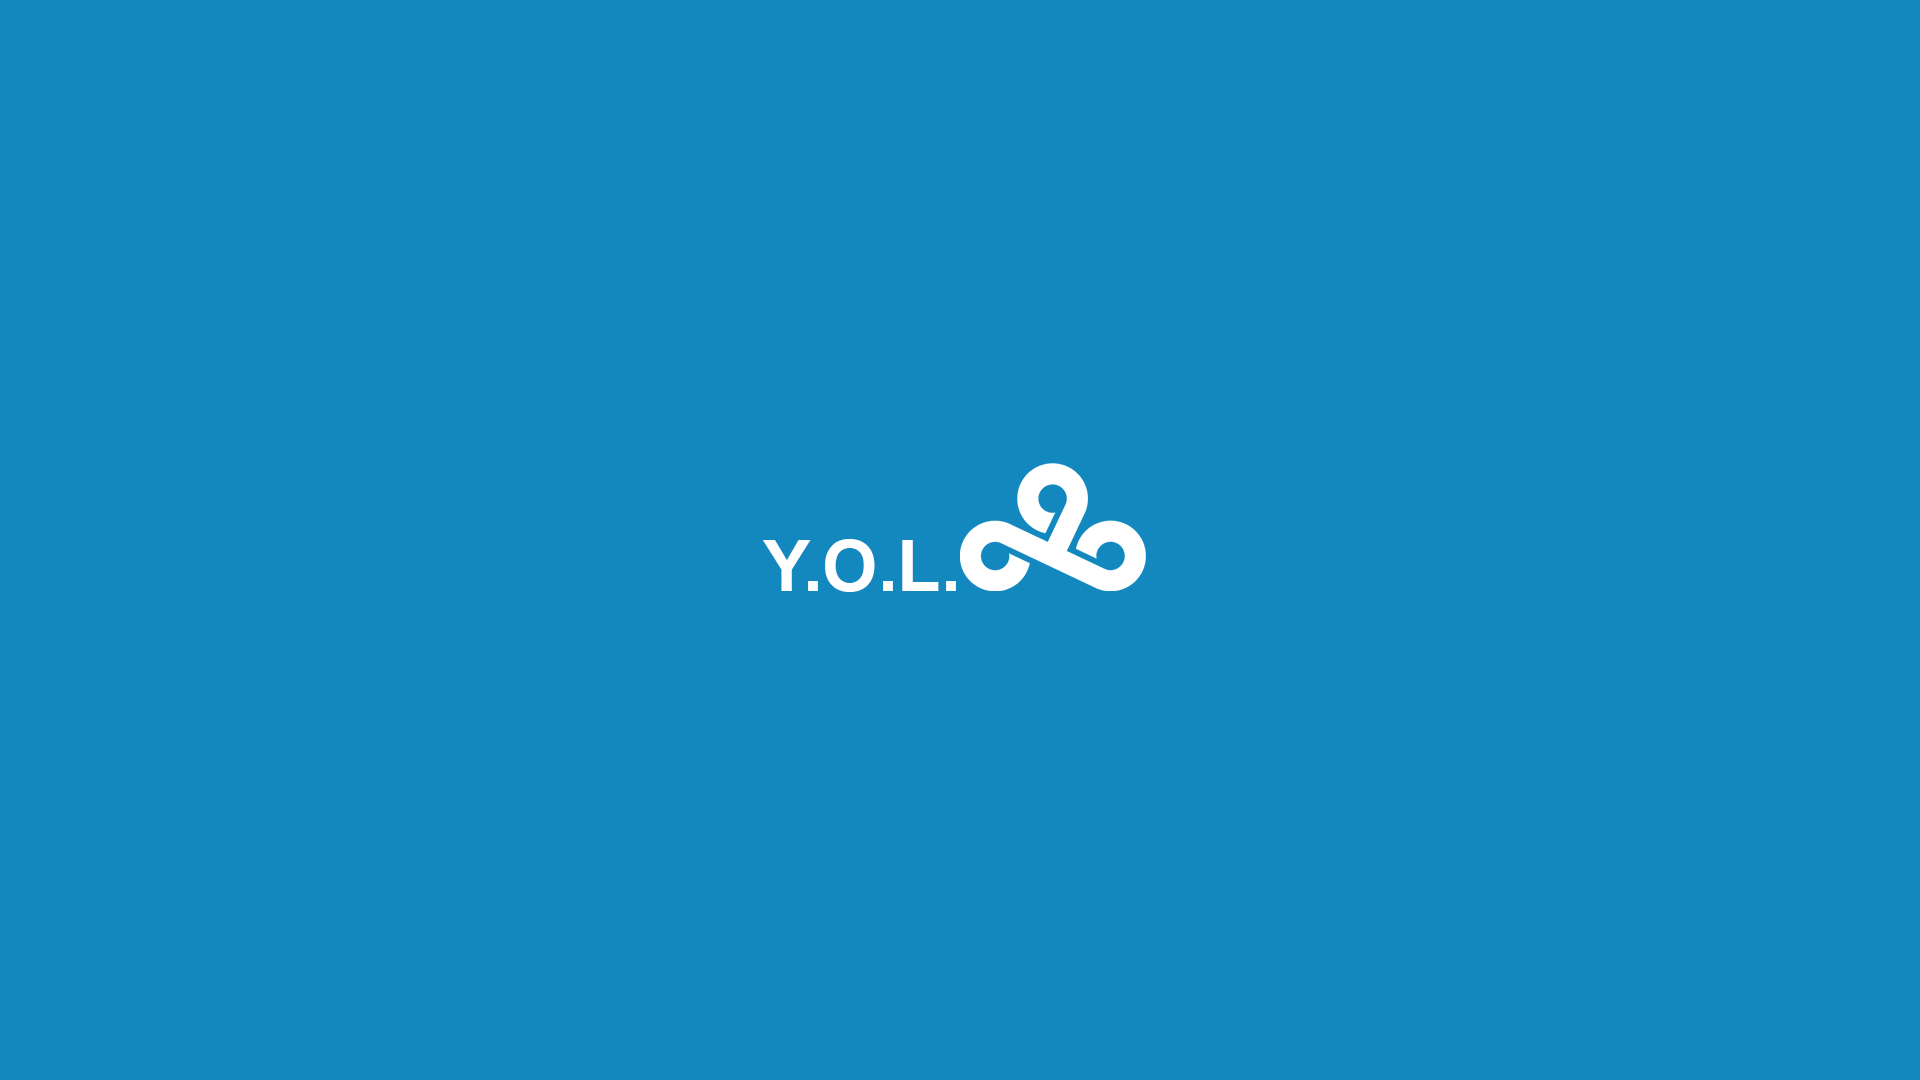 Cloud 9 Yolo. CS:GO Wallpaper and Background